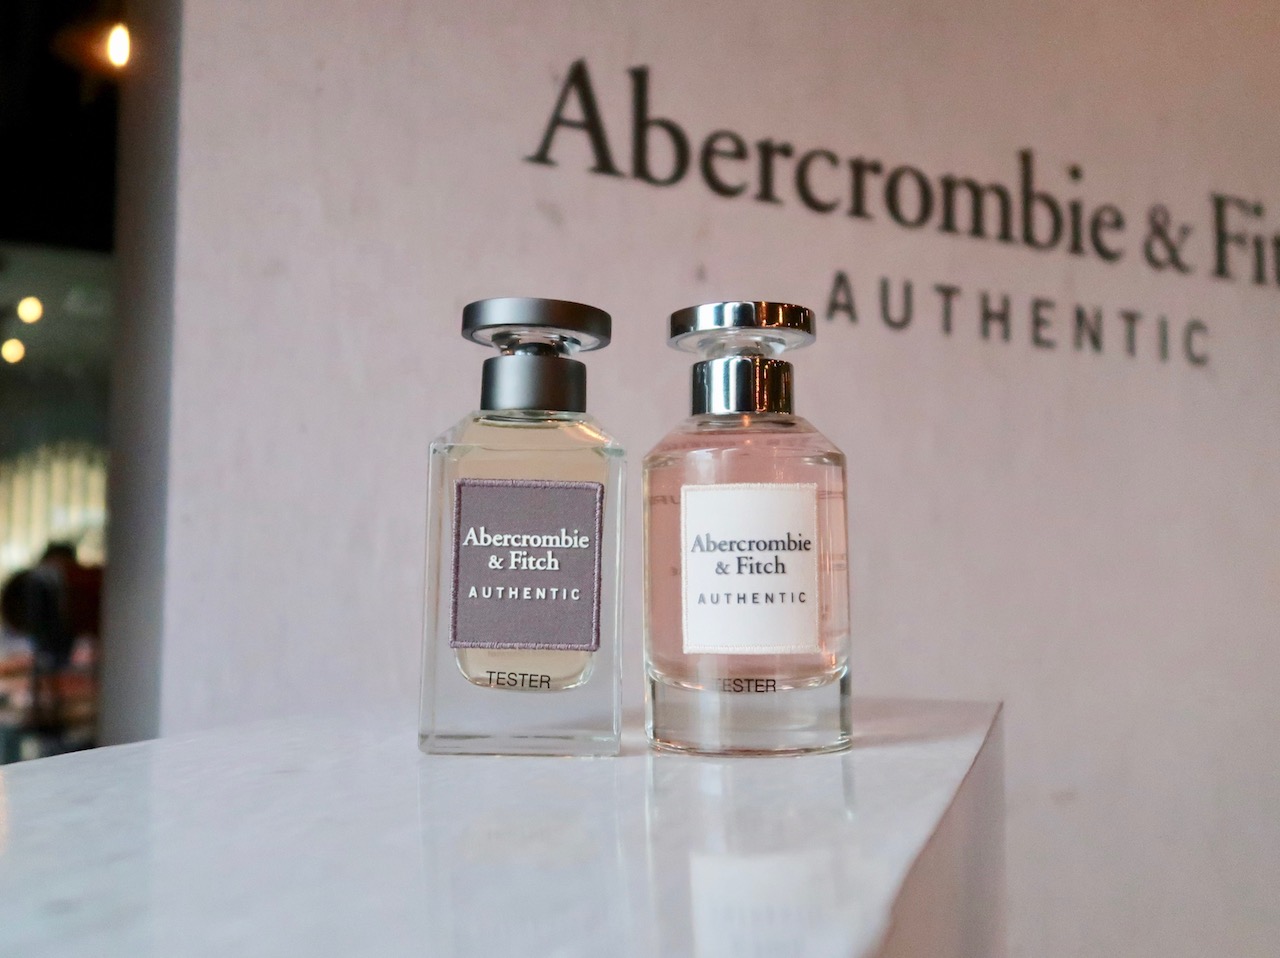 abercrombie & fitch perfume authentic